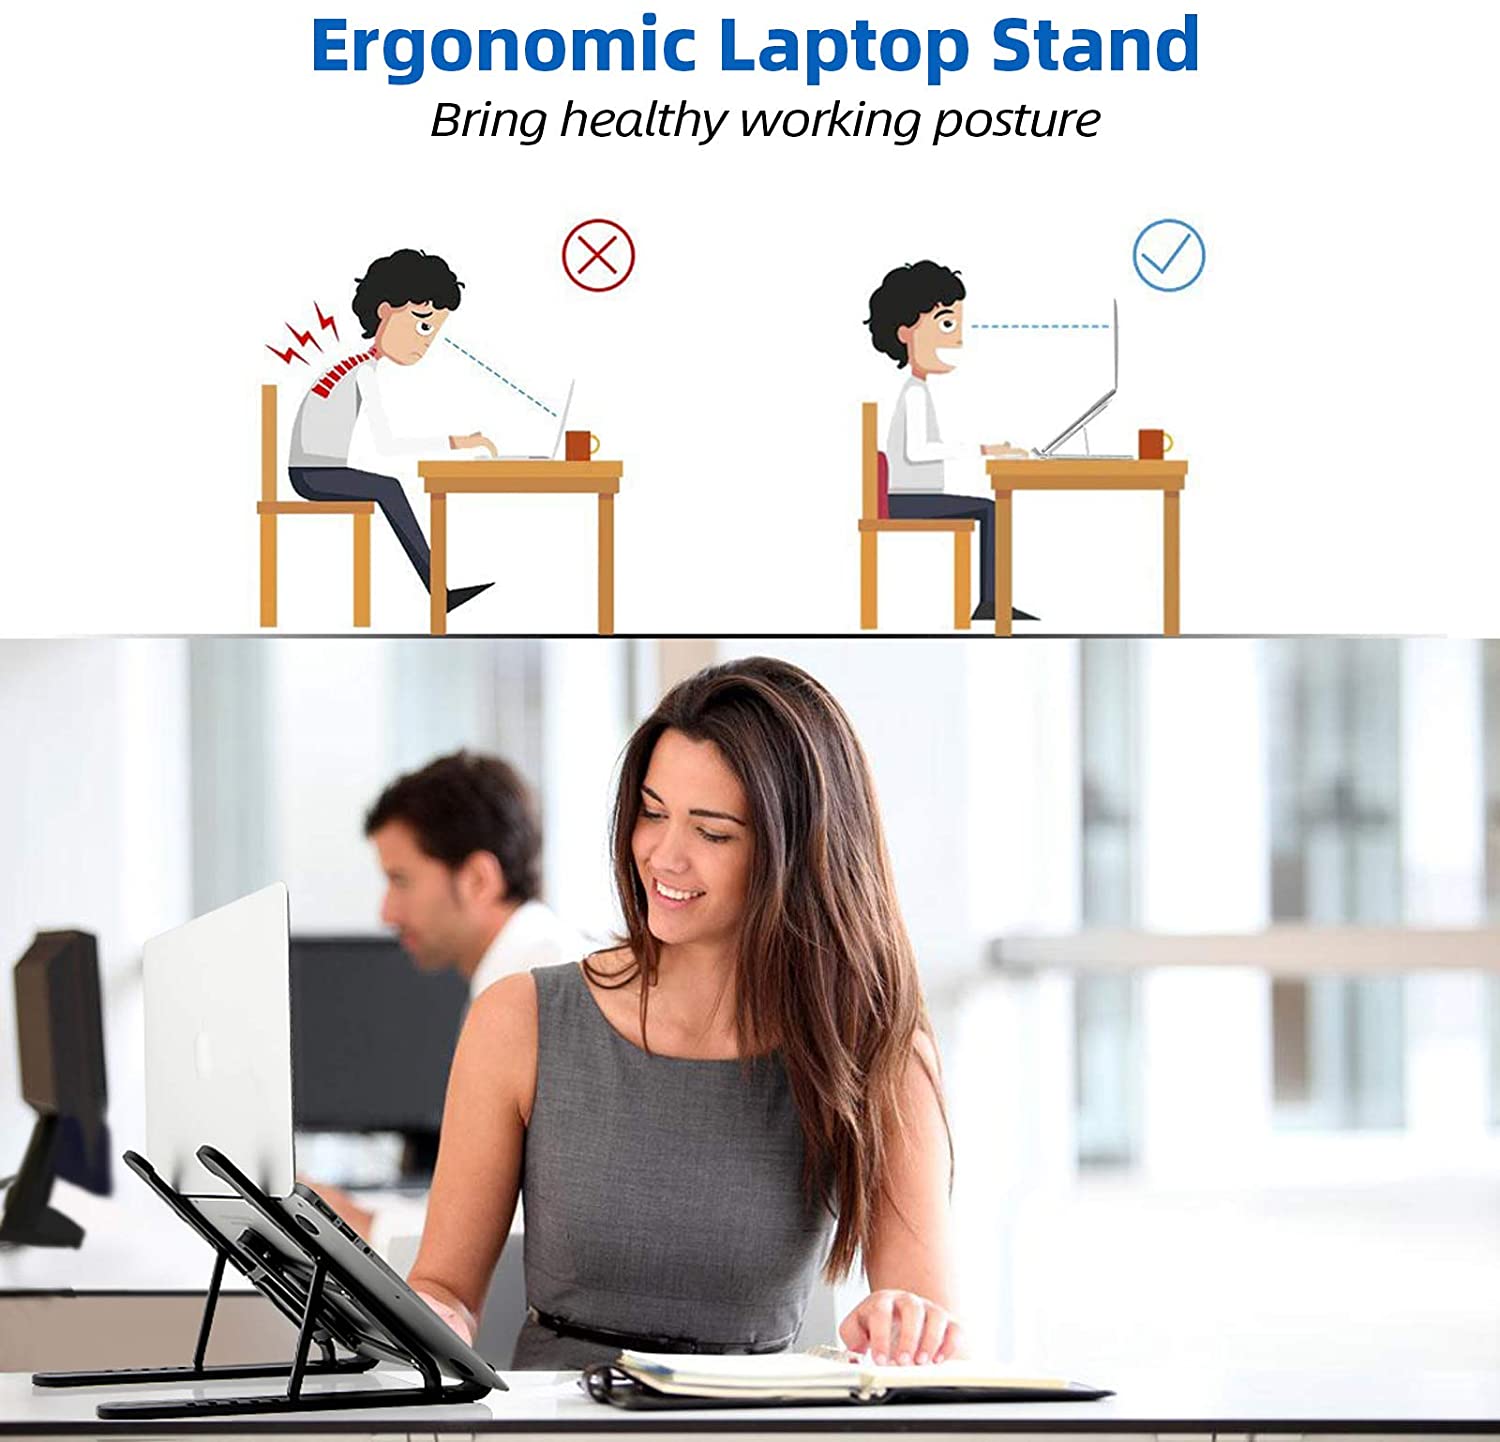 Foldable Laptop Stand - Gizgizmo